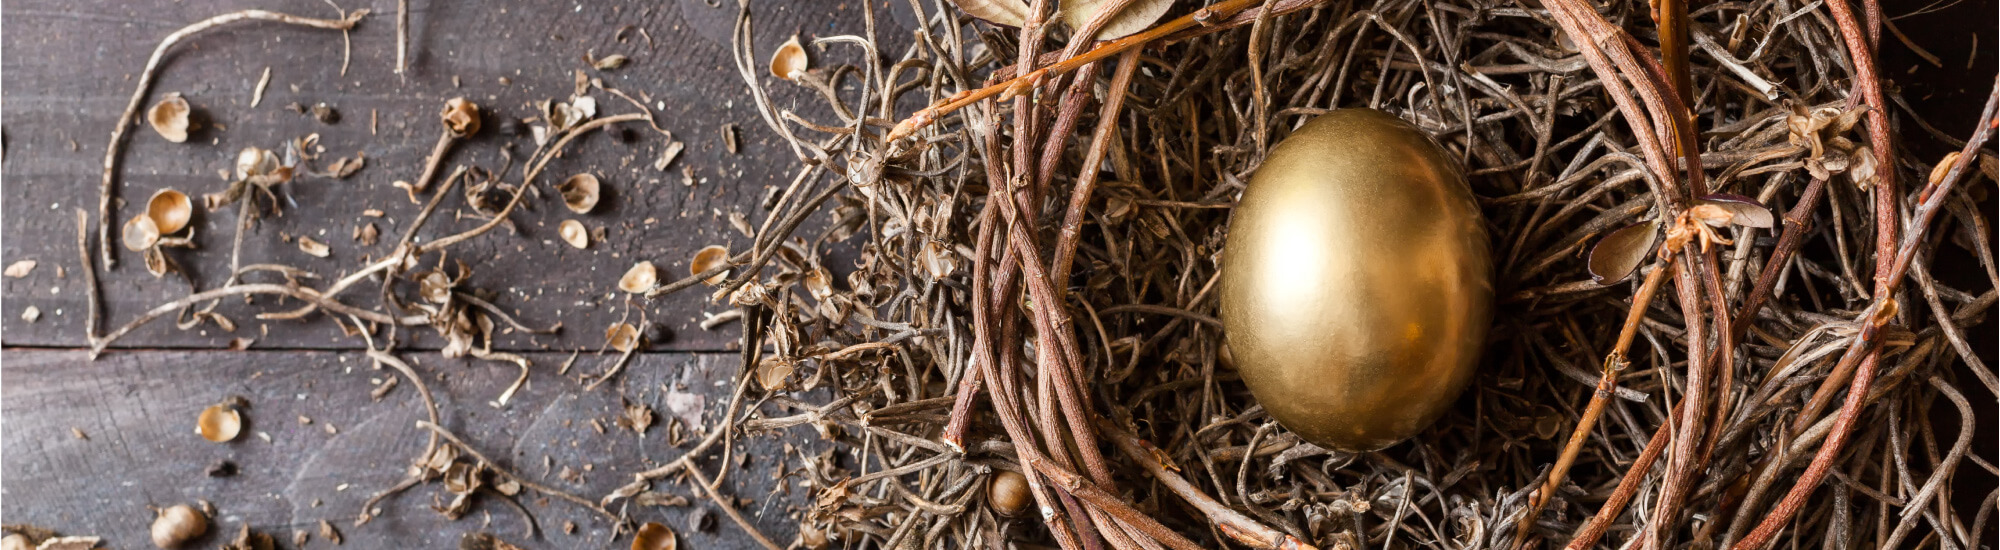 Use an Annuity to get a Golden Egg for the Golden Years